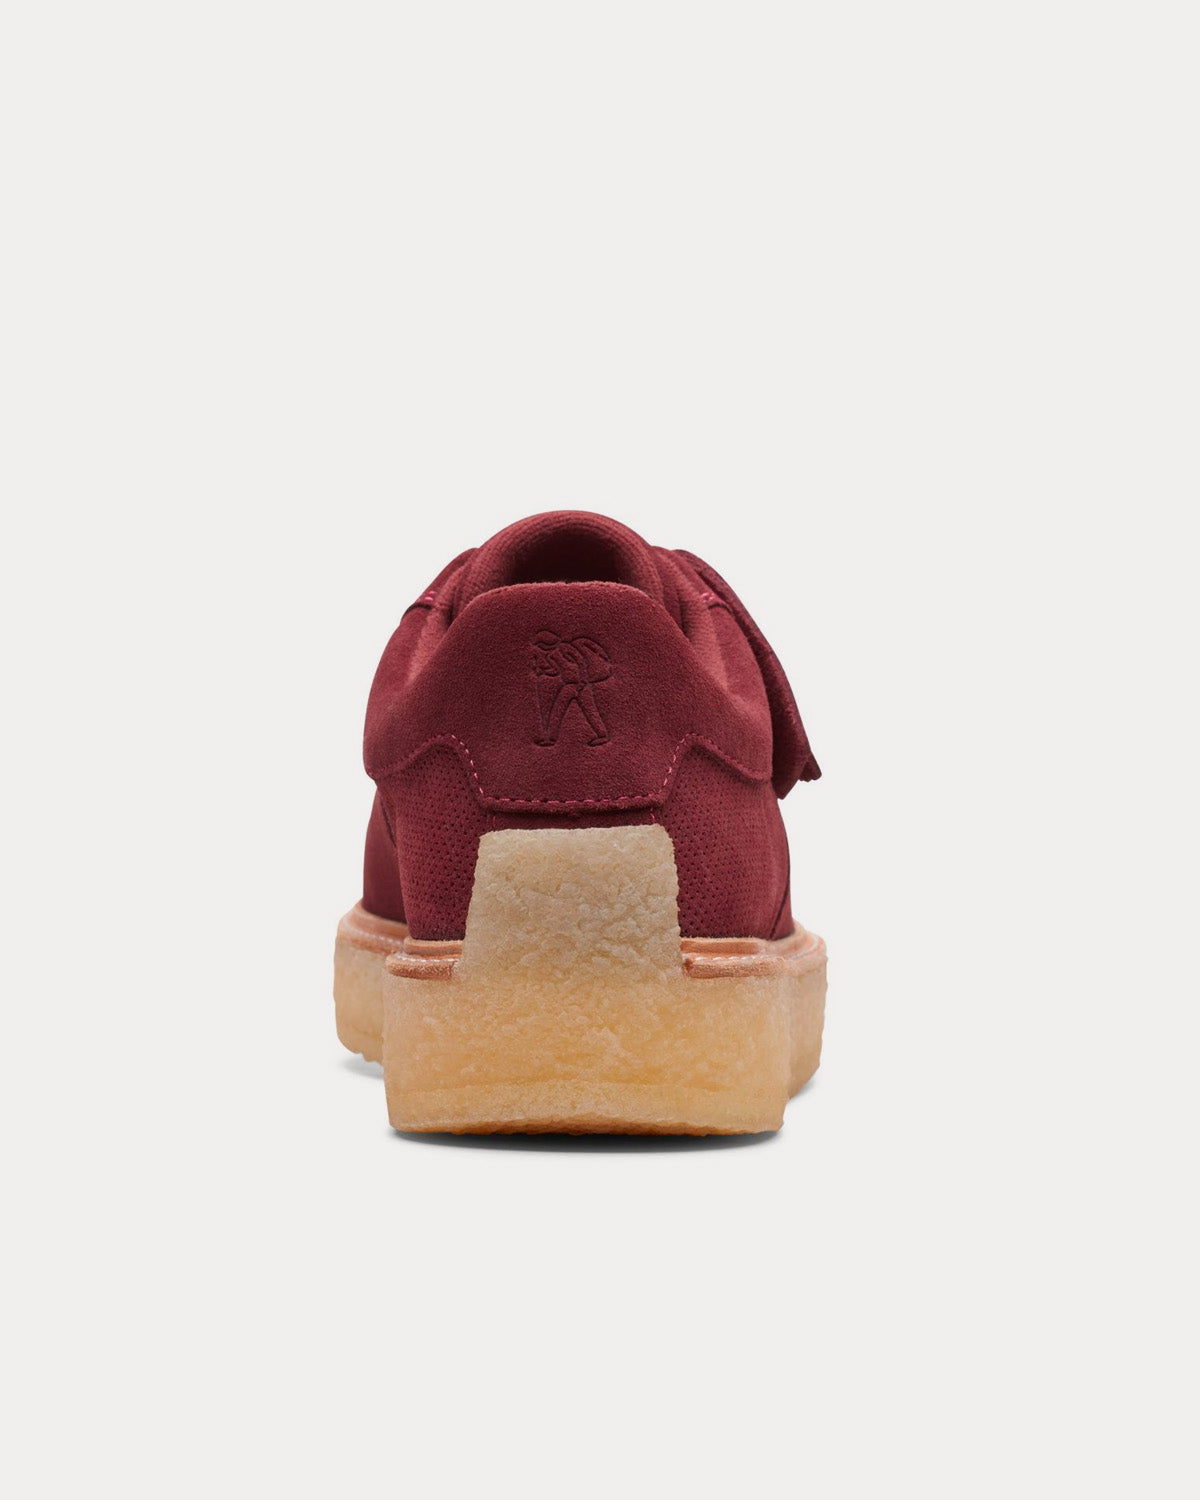 Clarks x Kith - Sandford Oxblood Low Top Sneakers